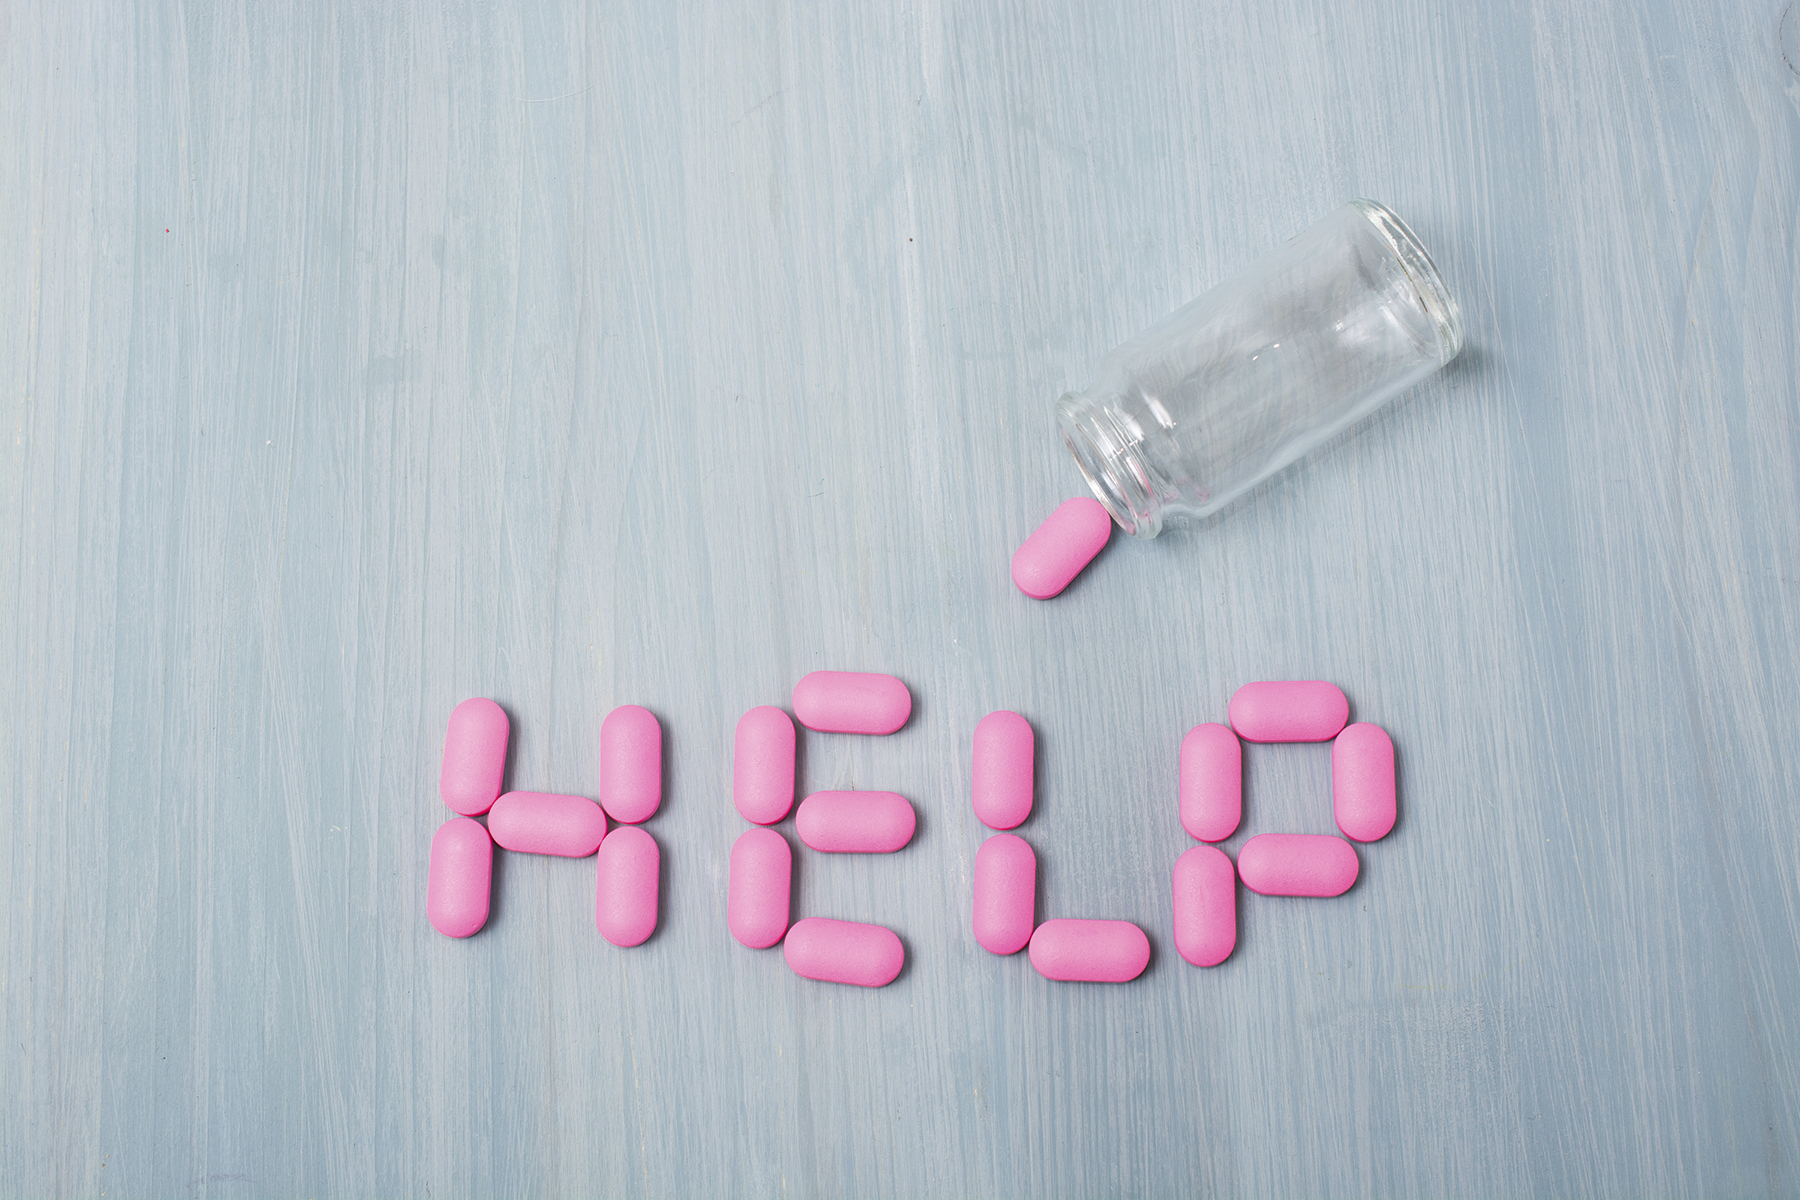 Substance abuse problem? Help is just around the corner - Law Offices